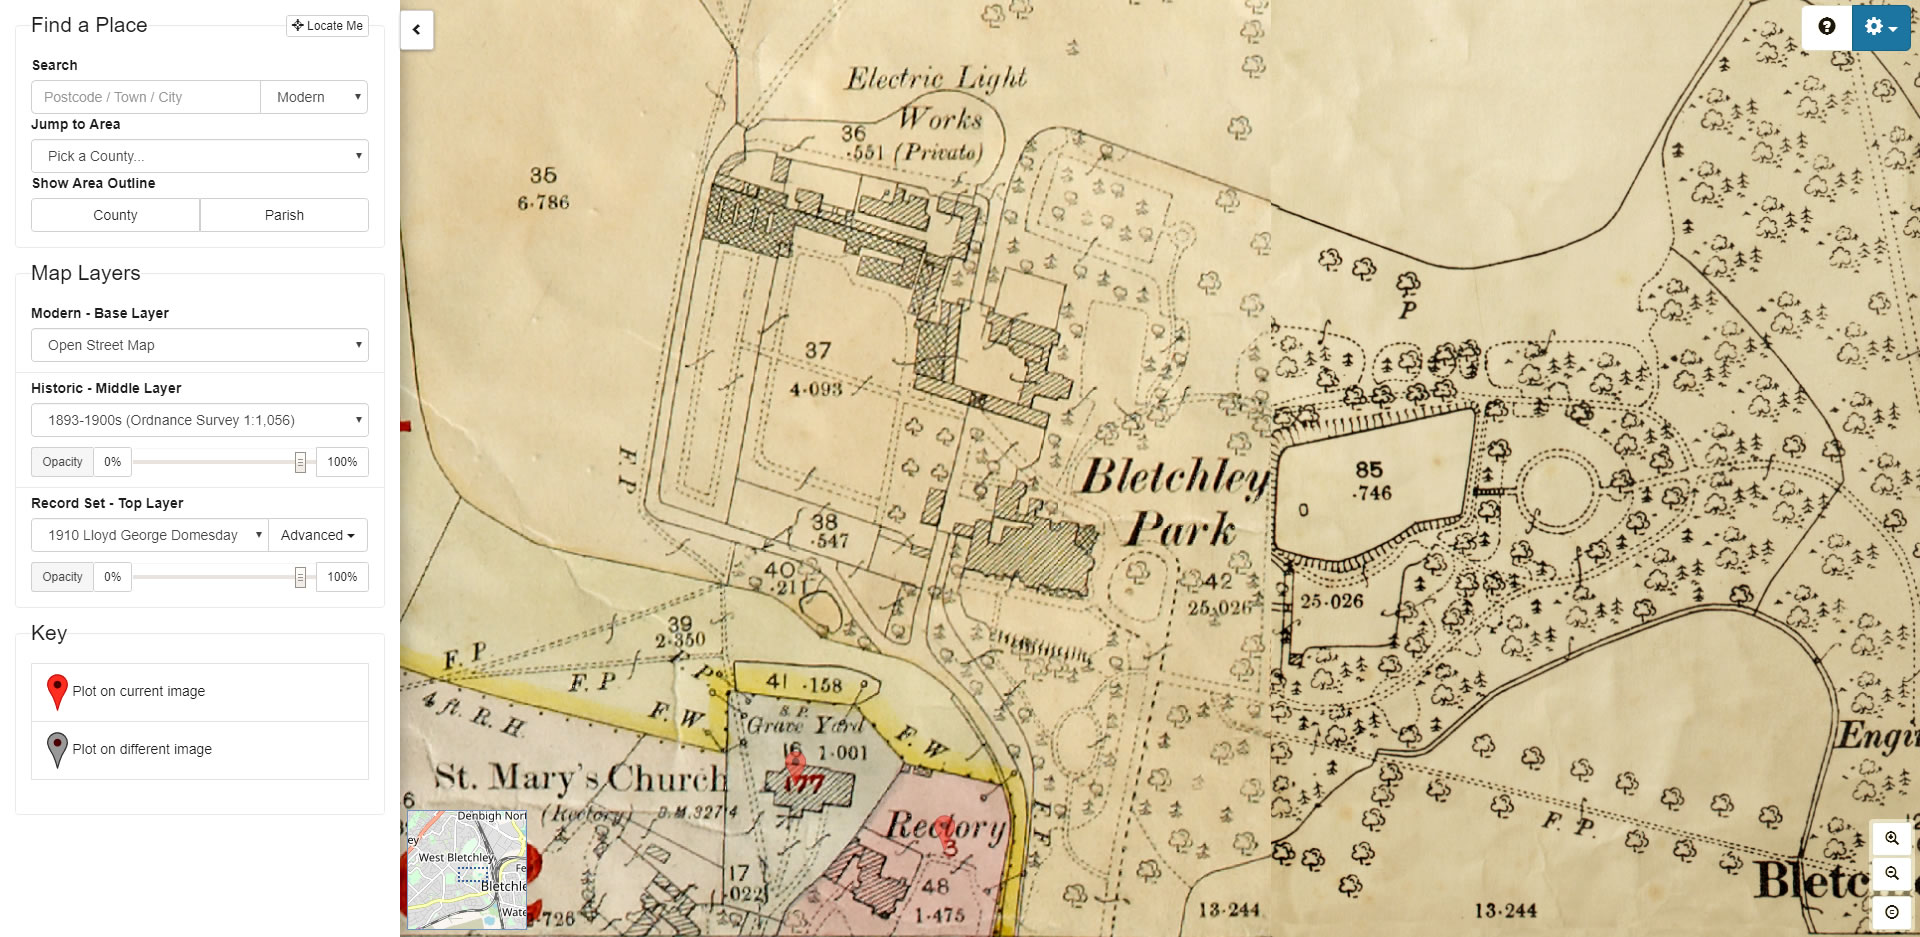 Lloyd George Domesday Map for Bletchley Park, viewed using TheGenealogist's Map Explorer™